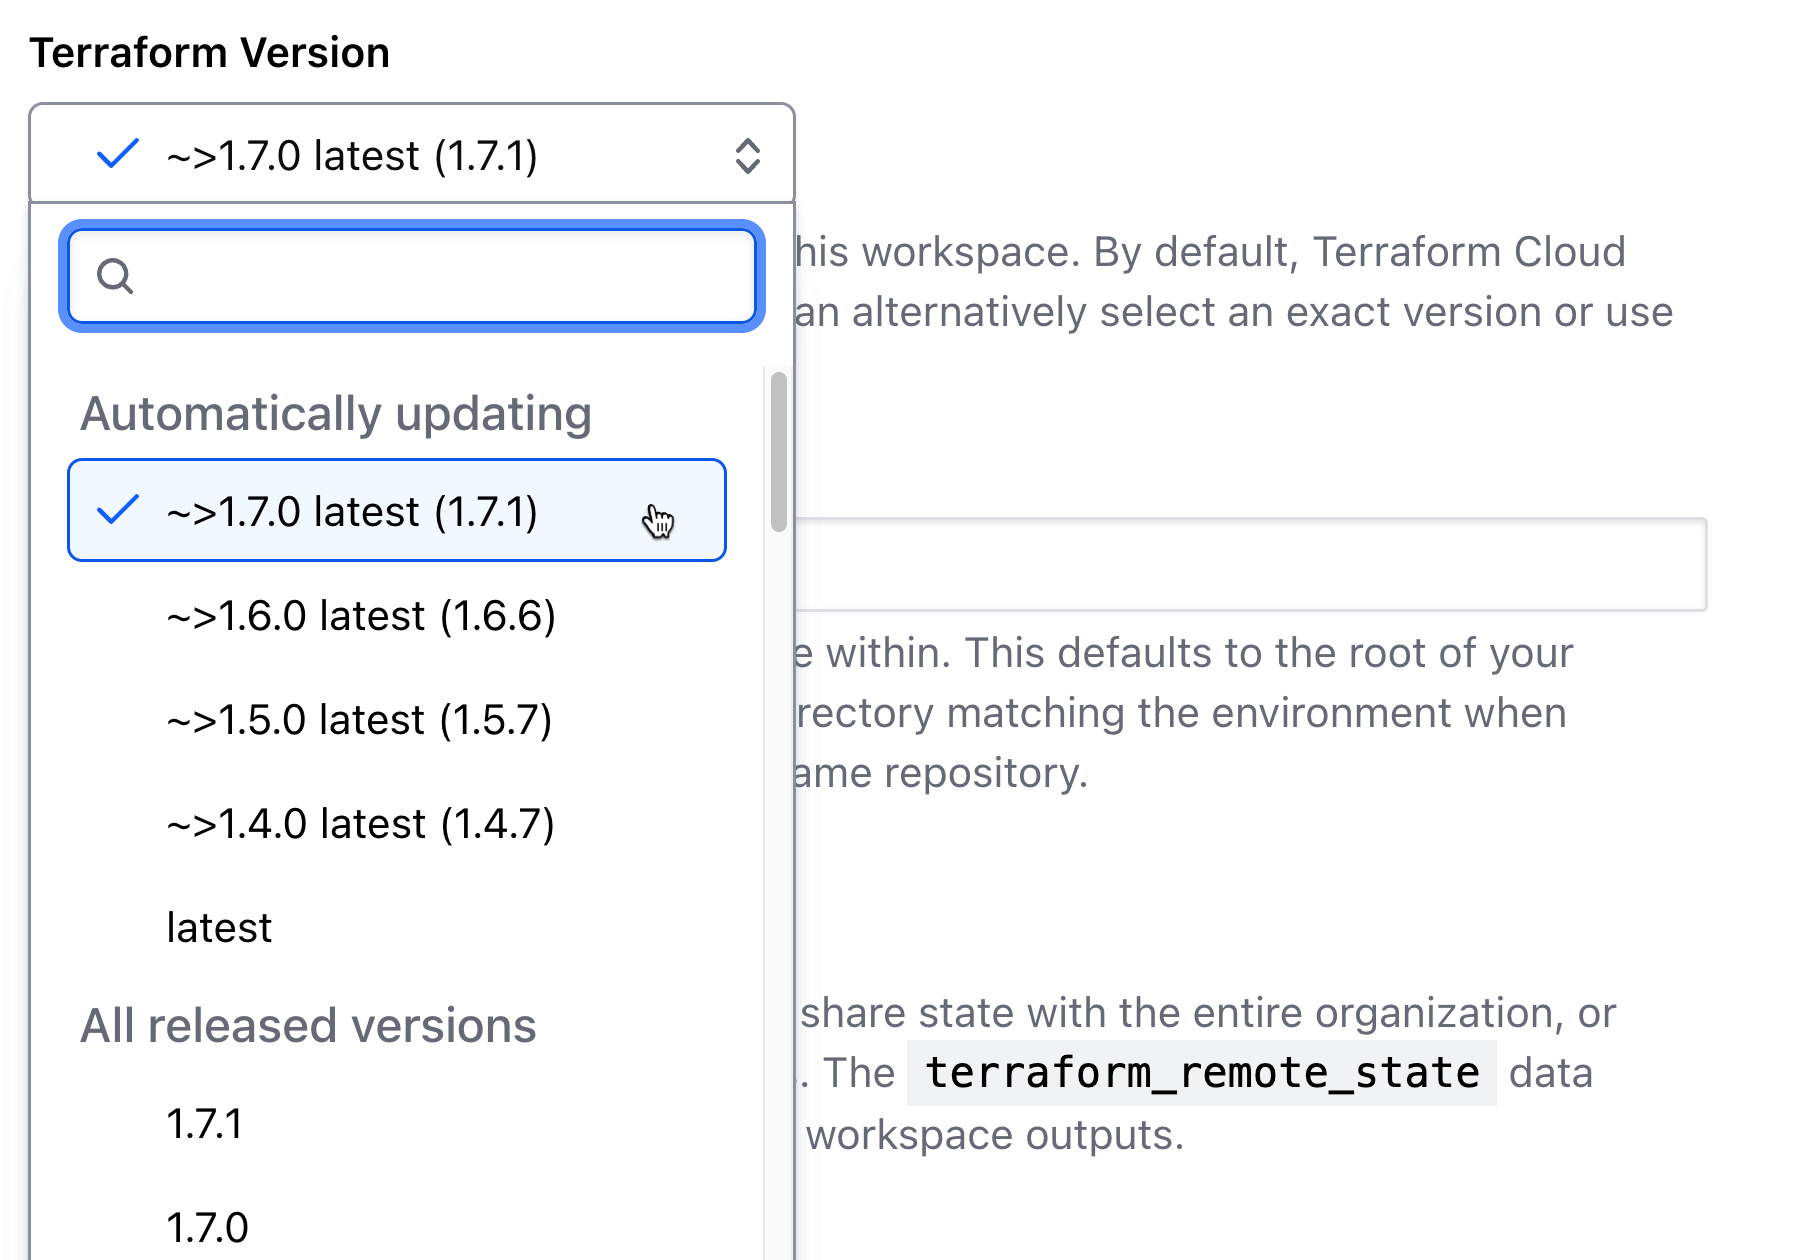 New version constraint selections allow a workspace to auto-update Terraform patch releases within a minor version.